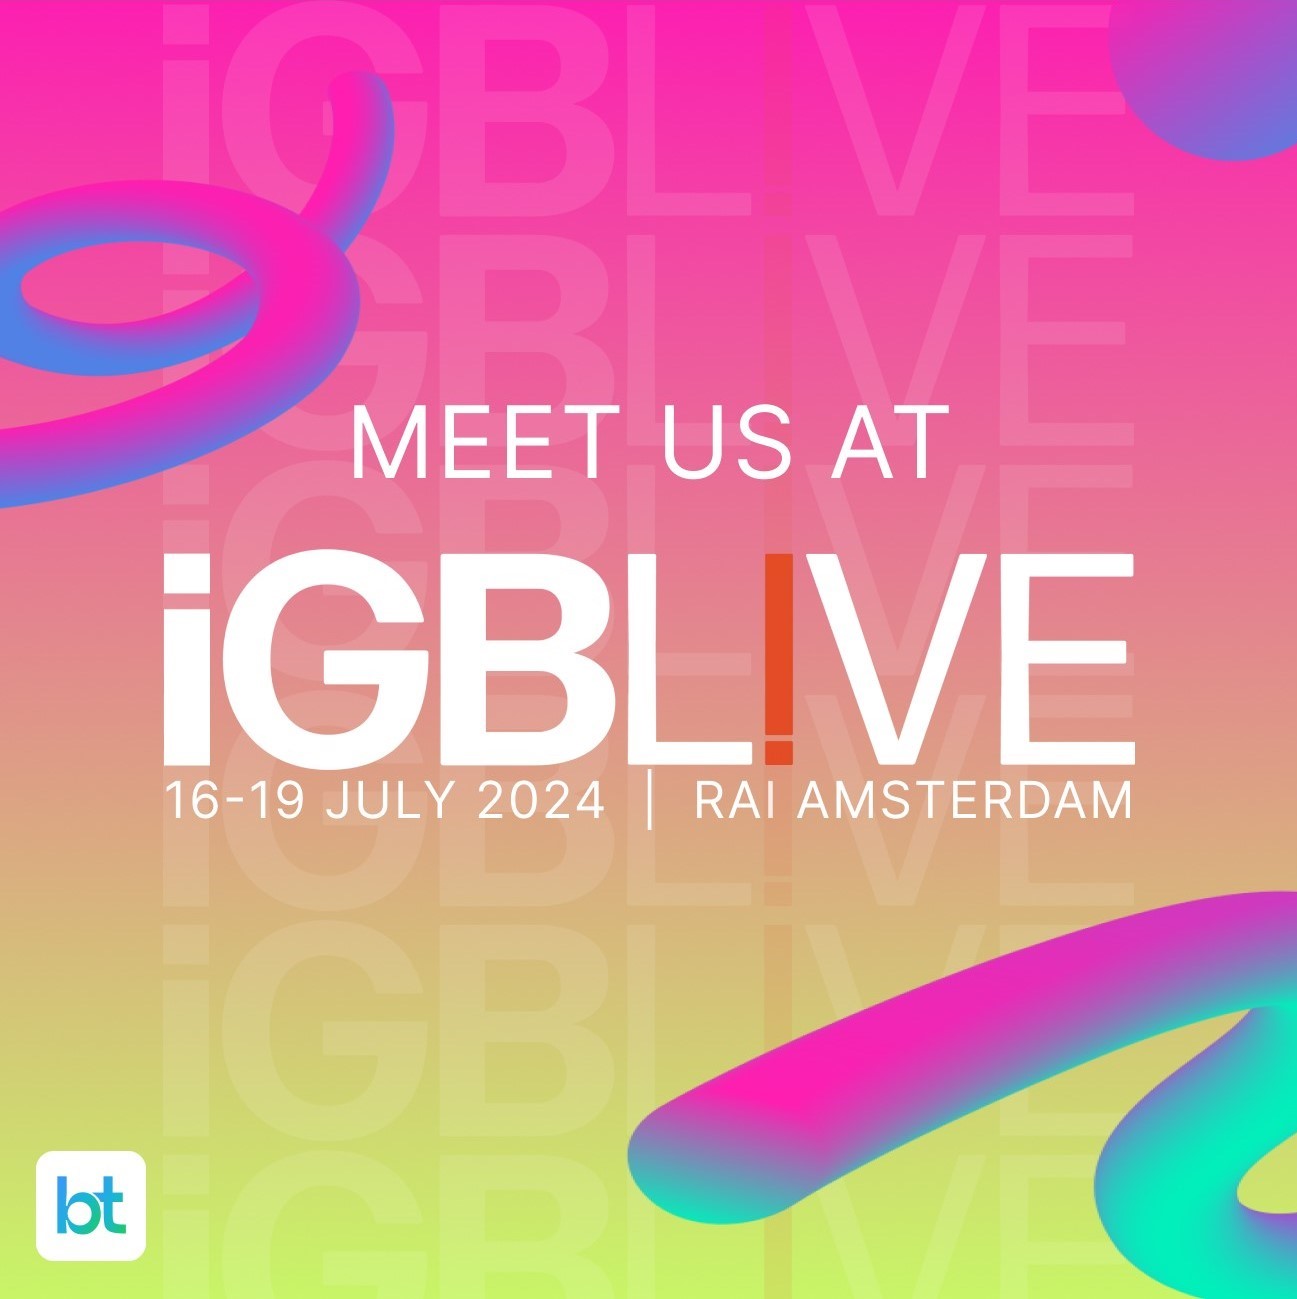 Betatransfer Kassa is going to IGB LIVE. And you?